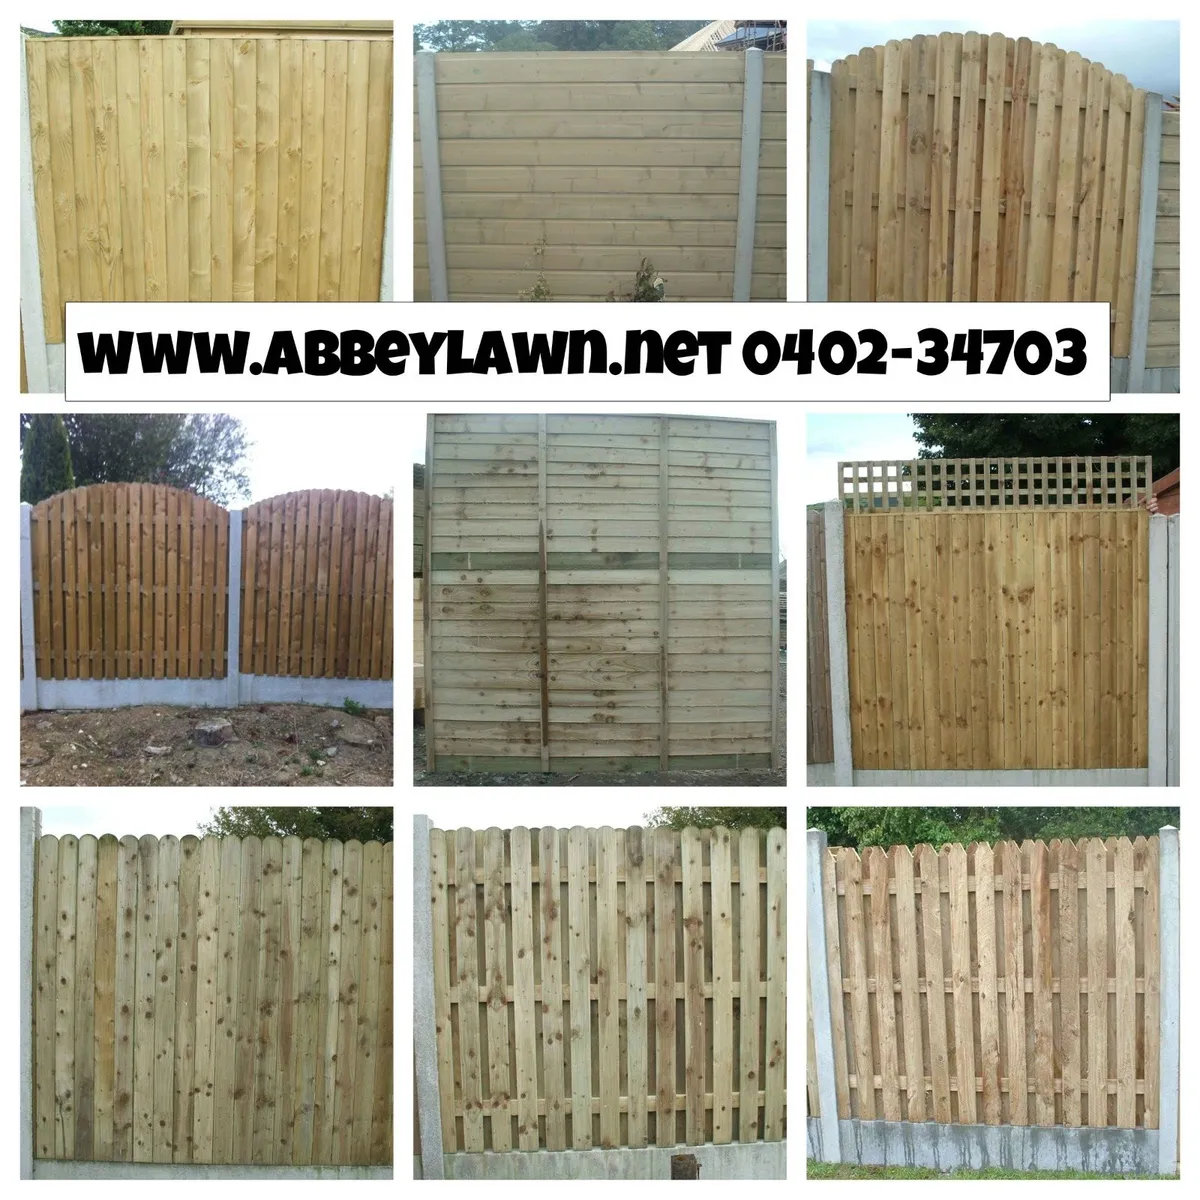 Timber Fencing Panels from €26 each